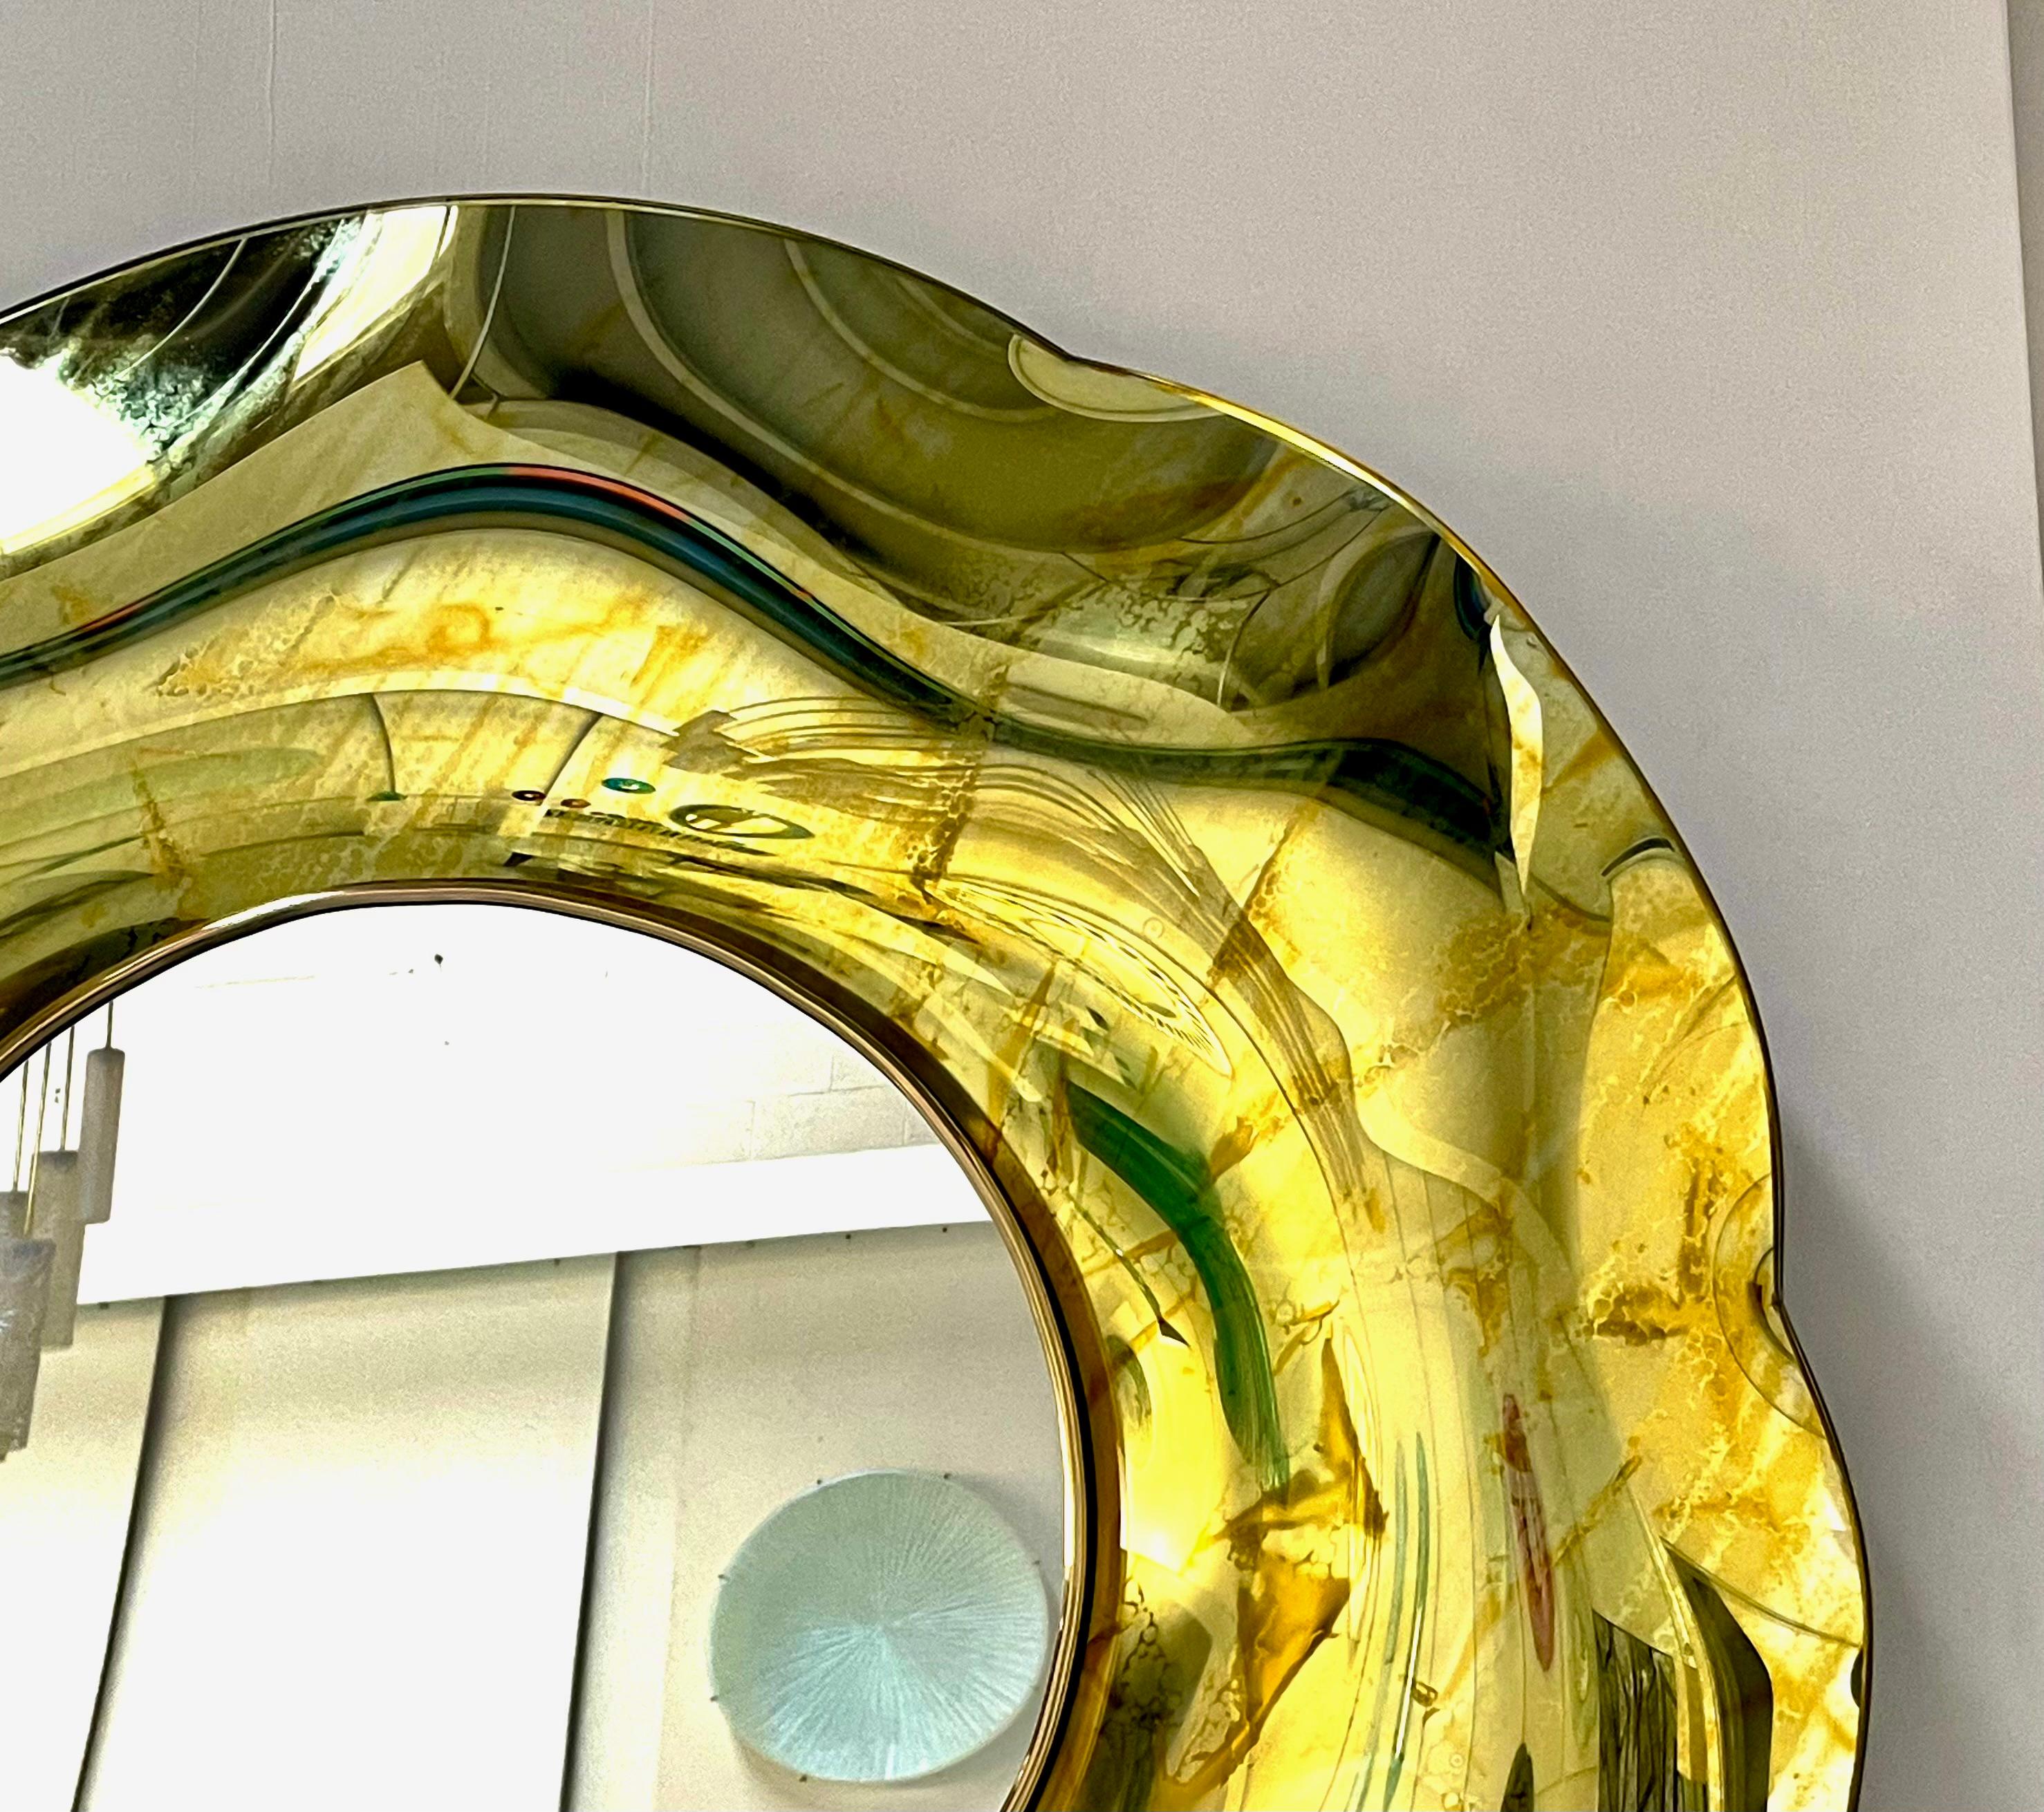 The ‘Undulate’ wavy mirror is an artistic object of pure art and italian design. 
The crystal has been hand-worked and expertly curved by the artist. 
The support structure is made of wood and brass. 
Its circular shape and its harmonious curves